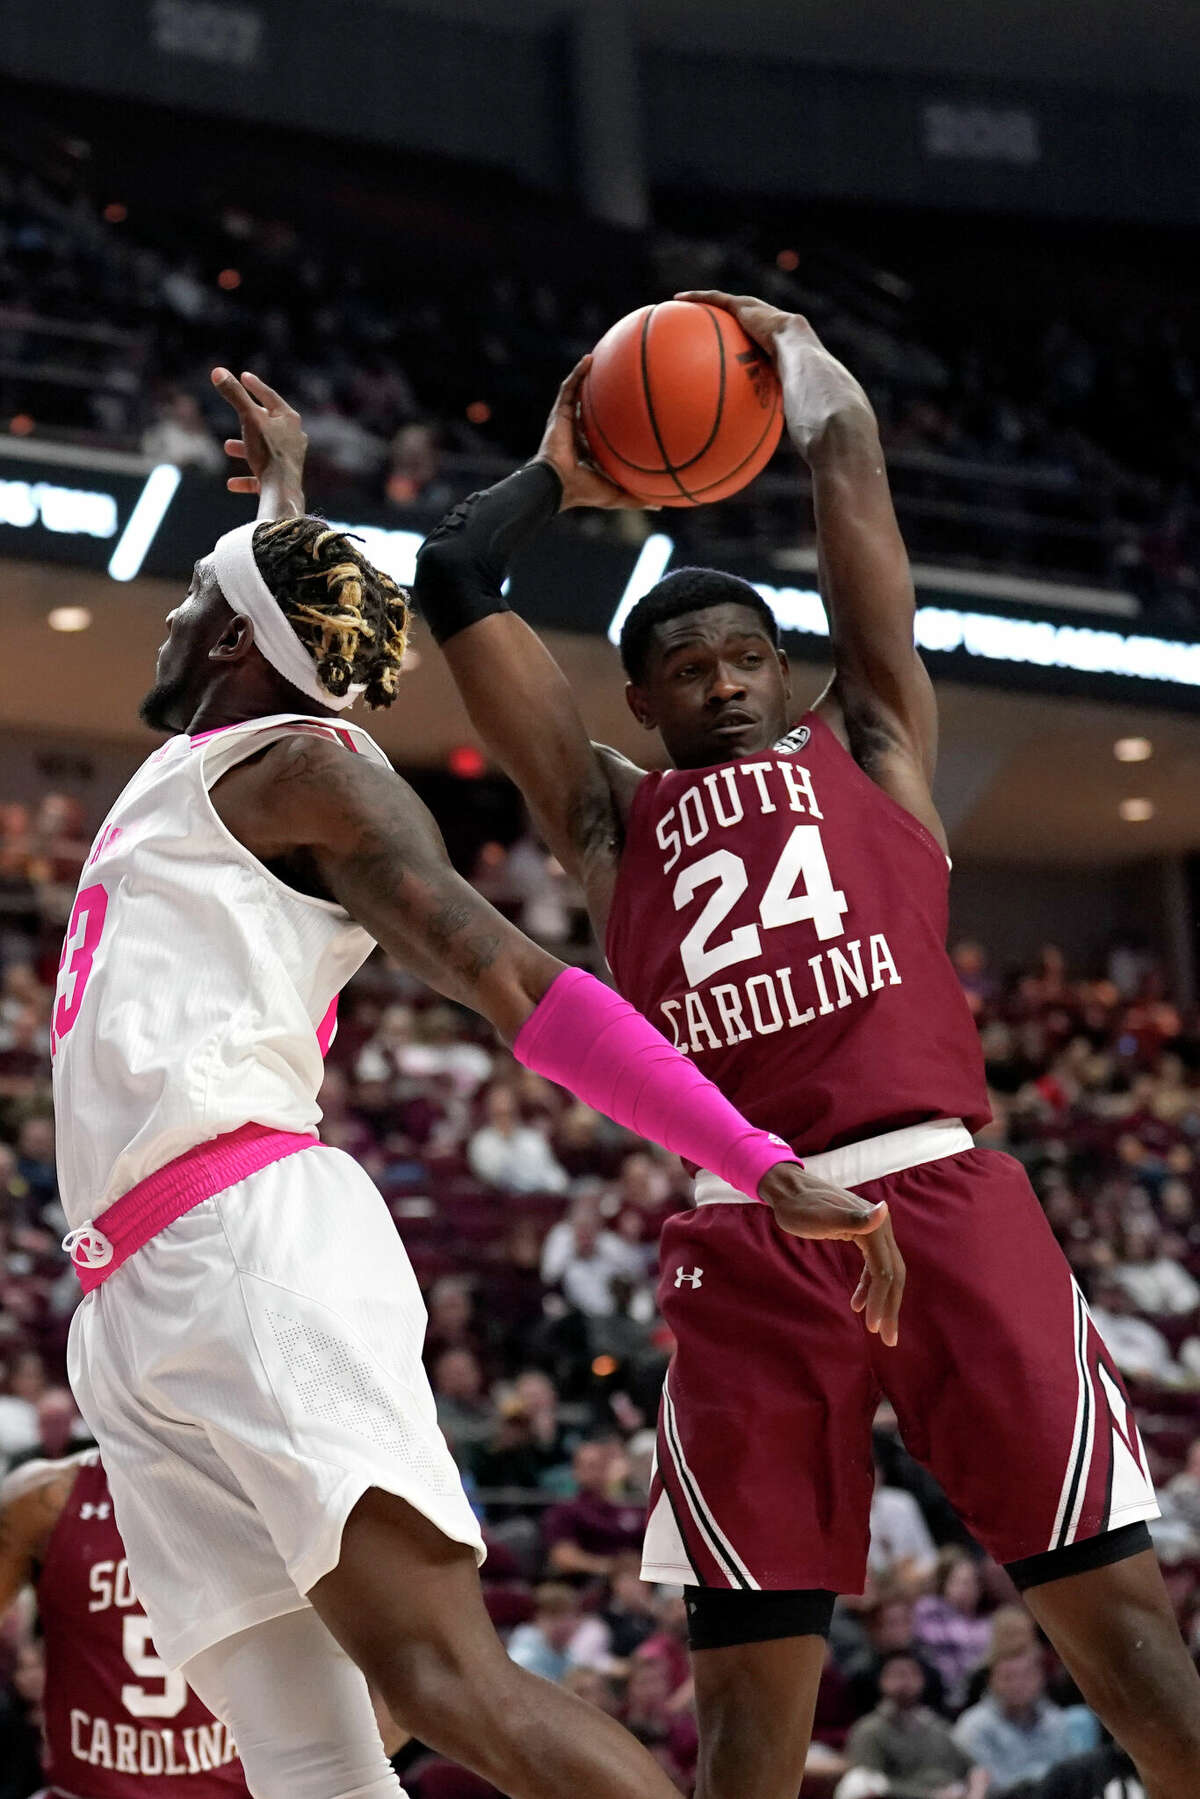 South Carolina forward Keyshawn Bryant (24) grabs a rebound over Texas A&M guard Quenton Jackson (3) during the first half of an NCAA college basketball game Saturday, Jan. 29, 2022, in College Station, Texas. (AP Photo/Sam Craft)